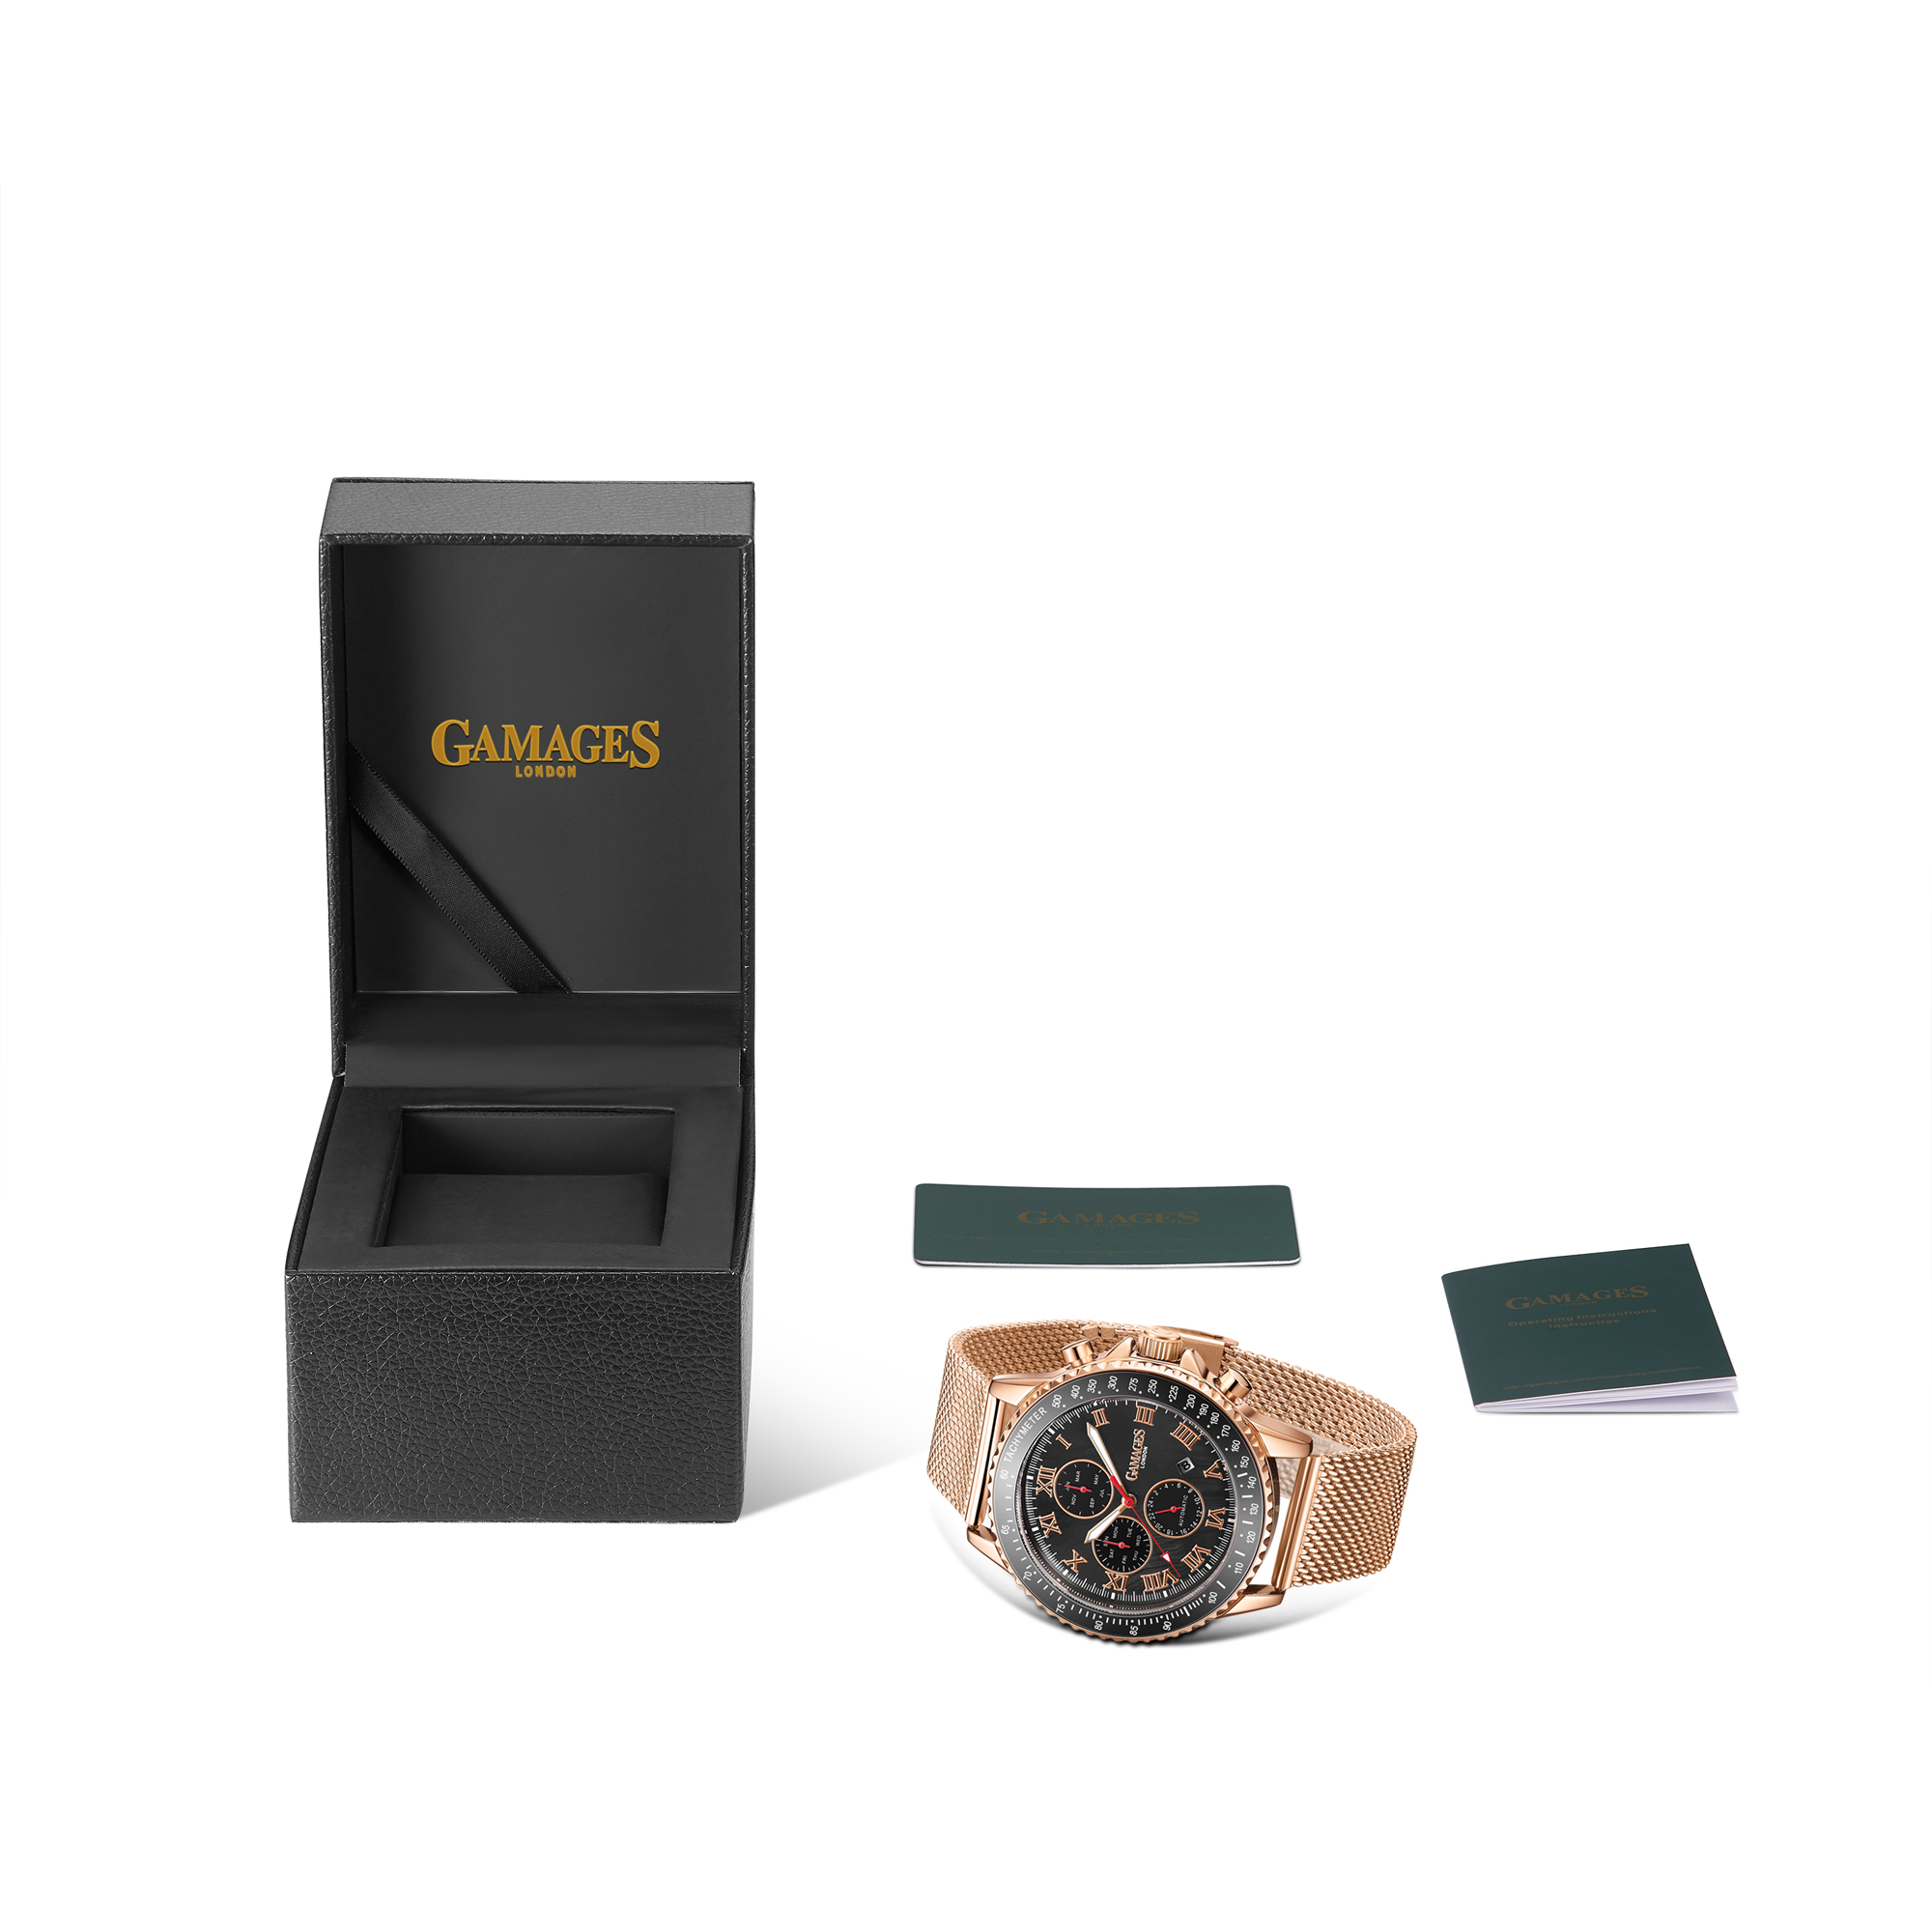 Gamages of London Hand Assembled Pinnacle Automatic Rose Black - 5 Years Warranty and Free Deliver.. - Image 4 of 4